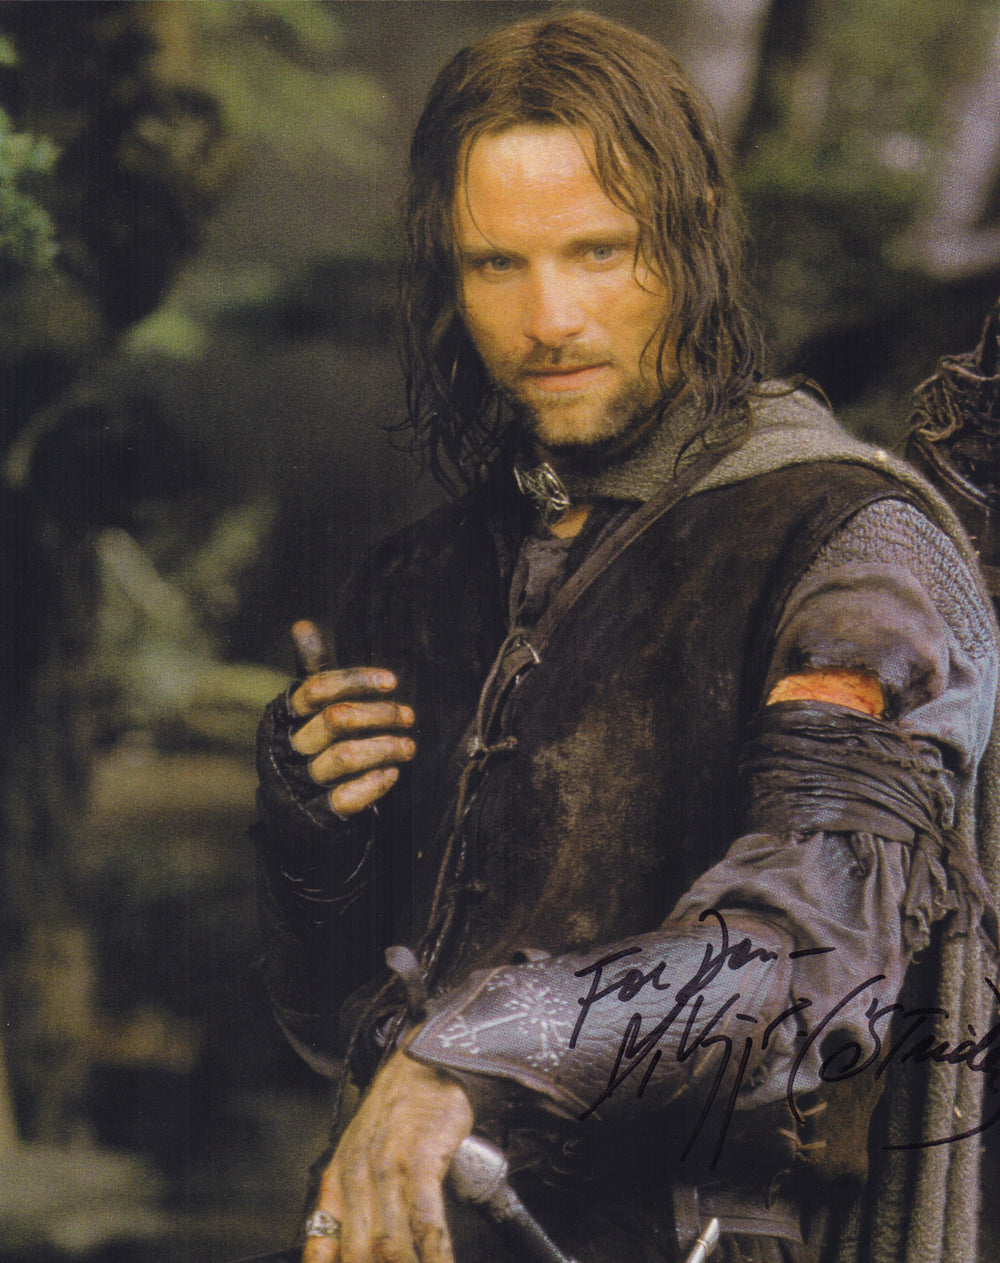 Aragorn strider brown duster (Lord of the Rings) – SokolWorkshop